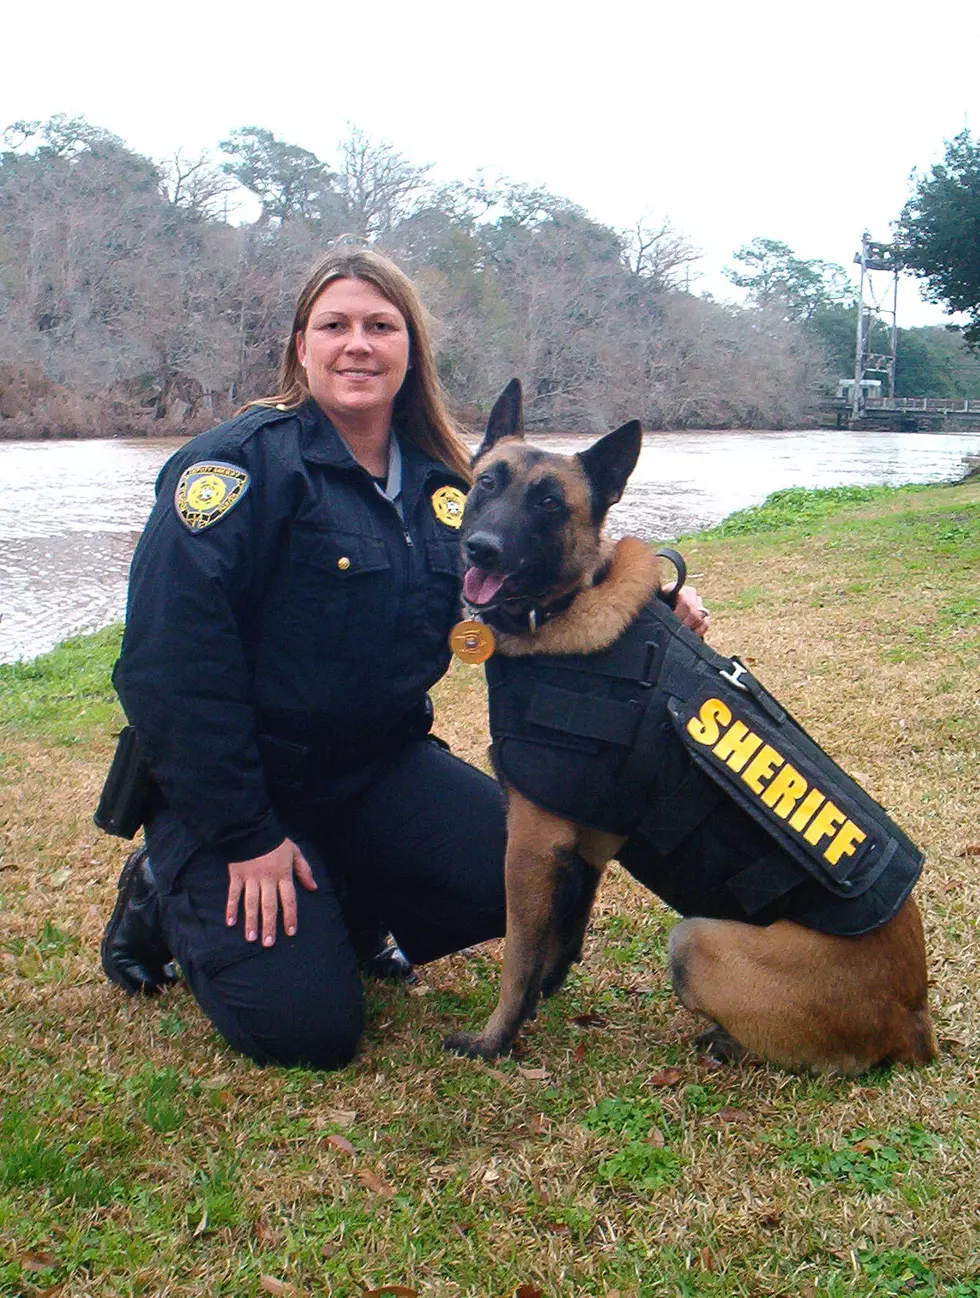 St. Martin Parish Sheriff’s Office Deputy Receives Certification For Canine From Nat’l Police Canine Assoc.